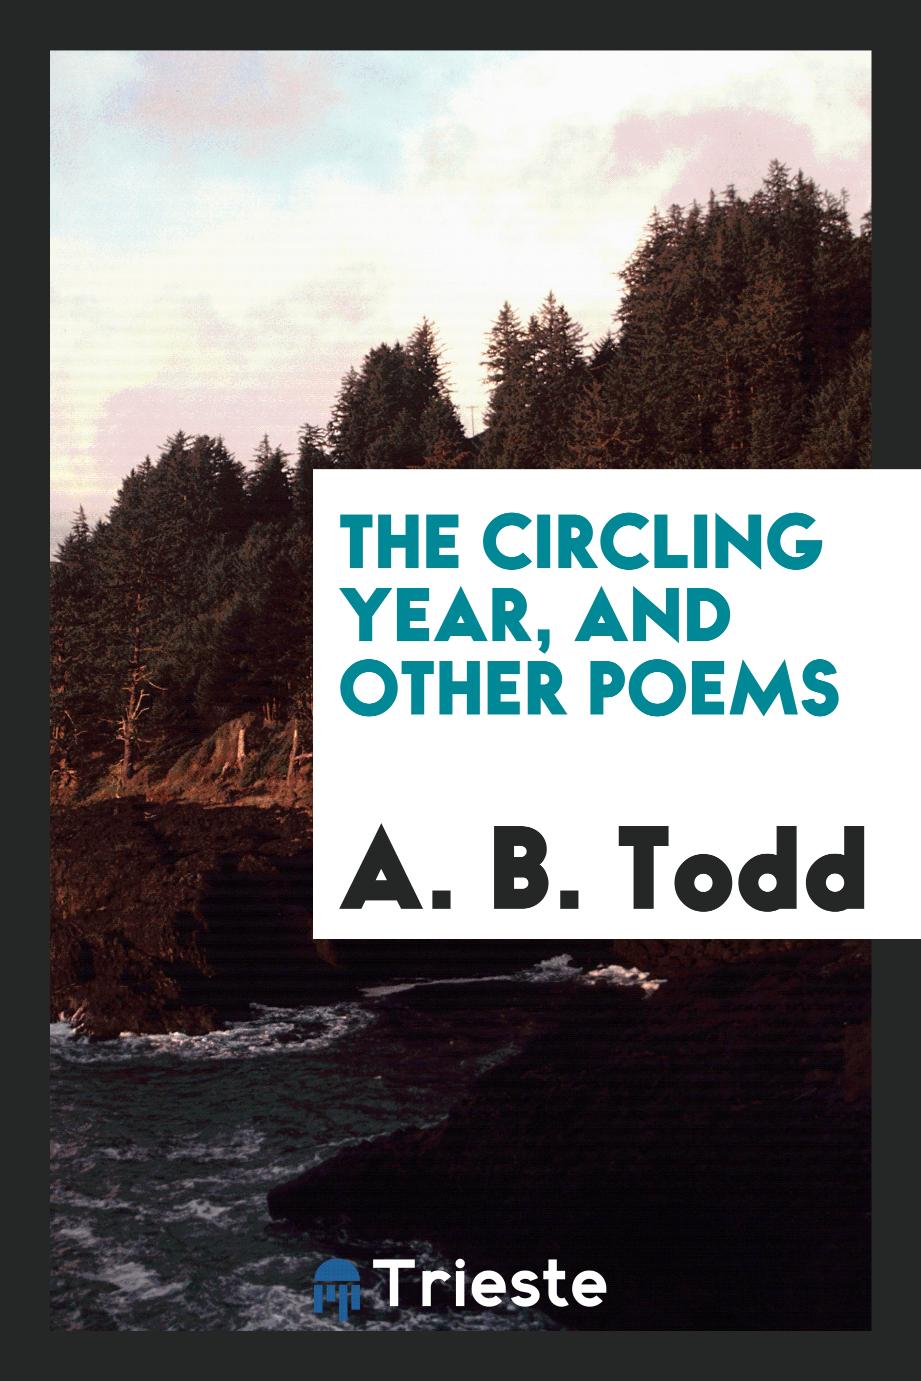 The Circling Year, and Other Poems